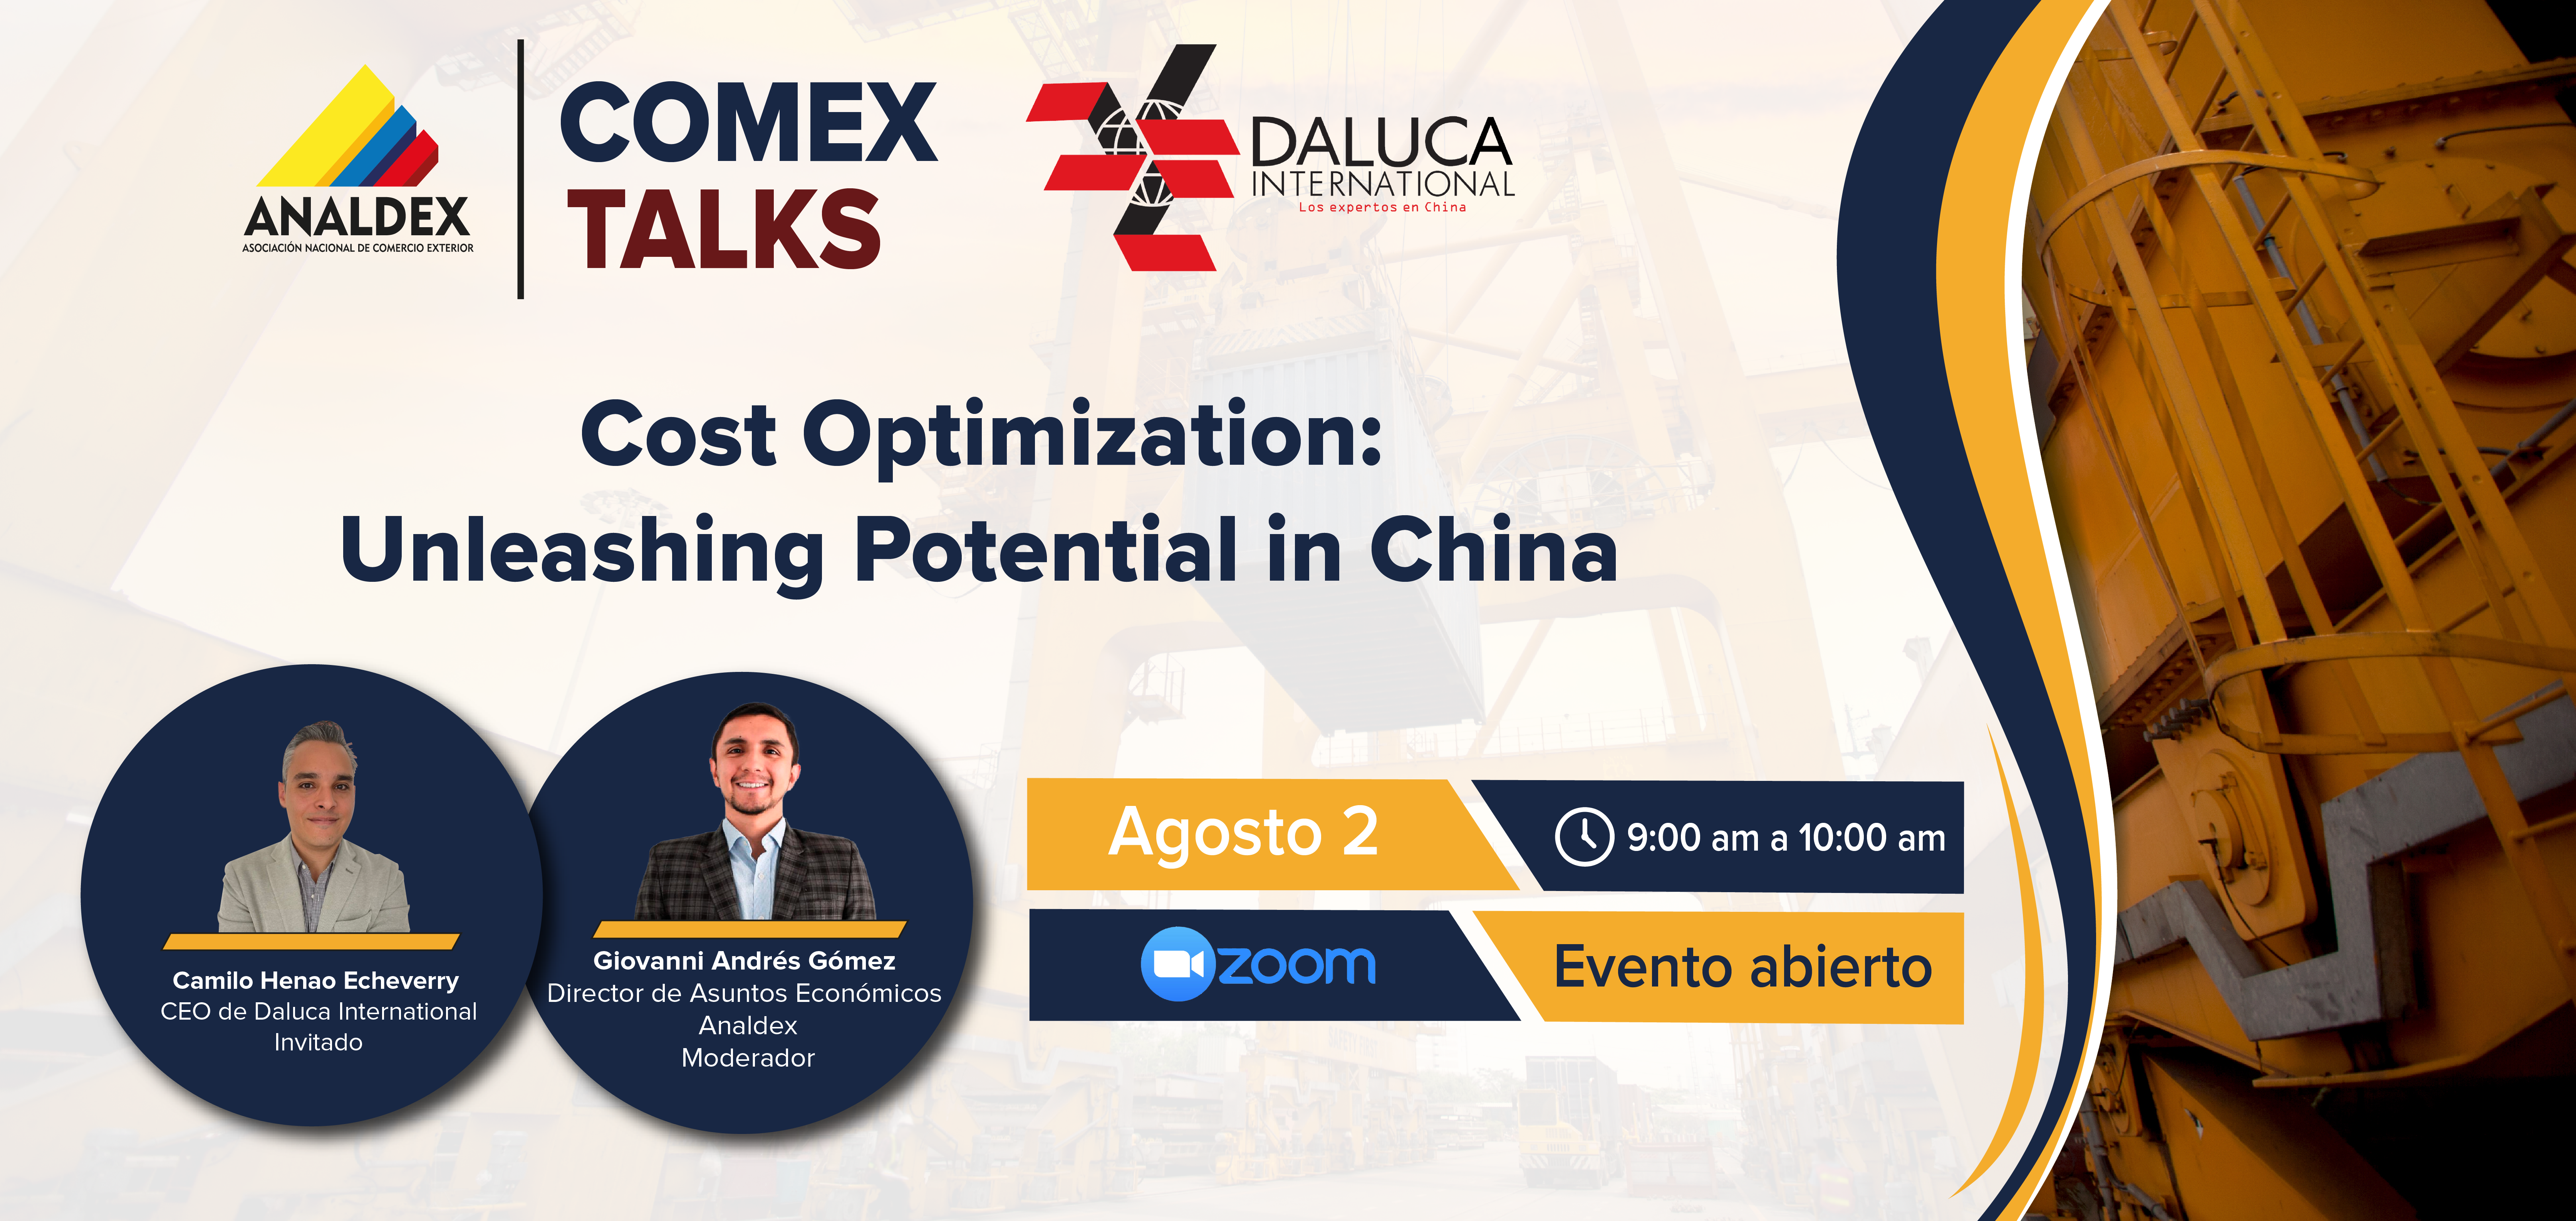 Comex Talks: Cost Optimization:  Unleashing Potential in China